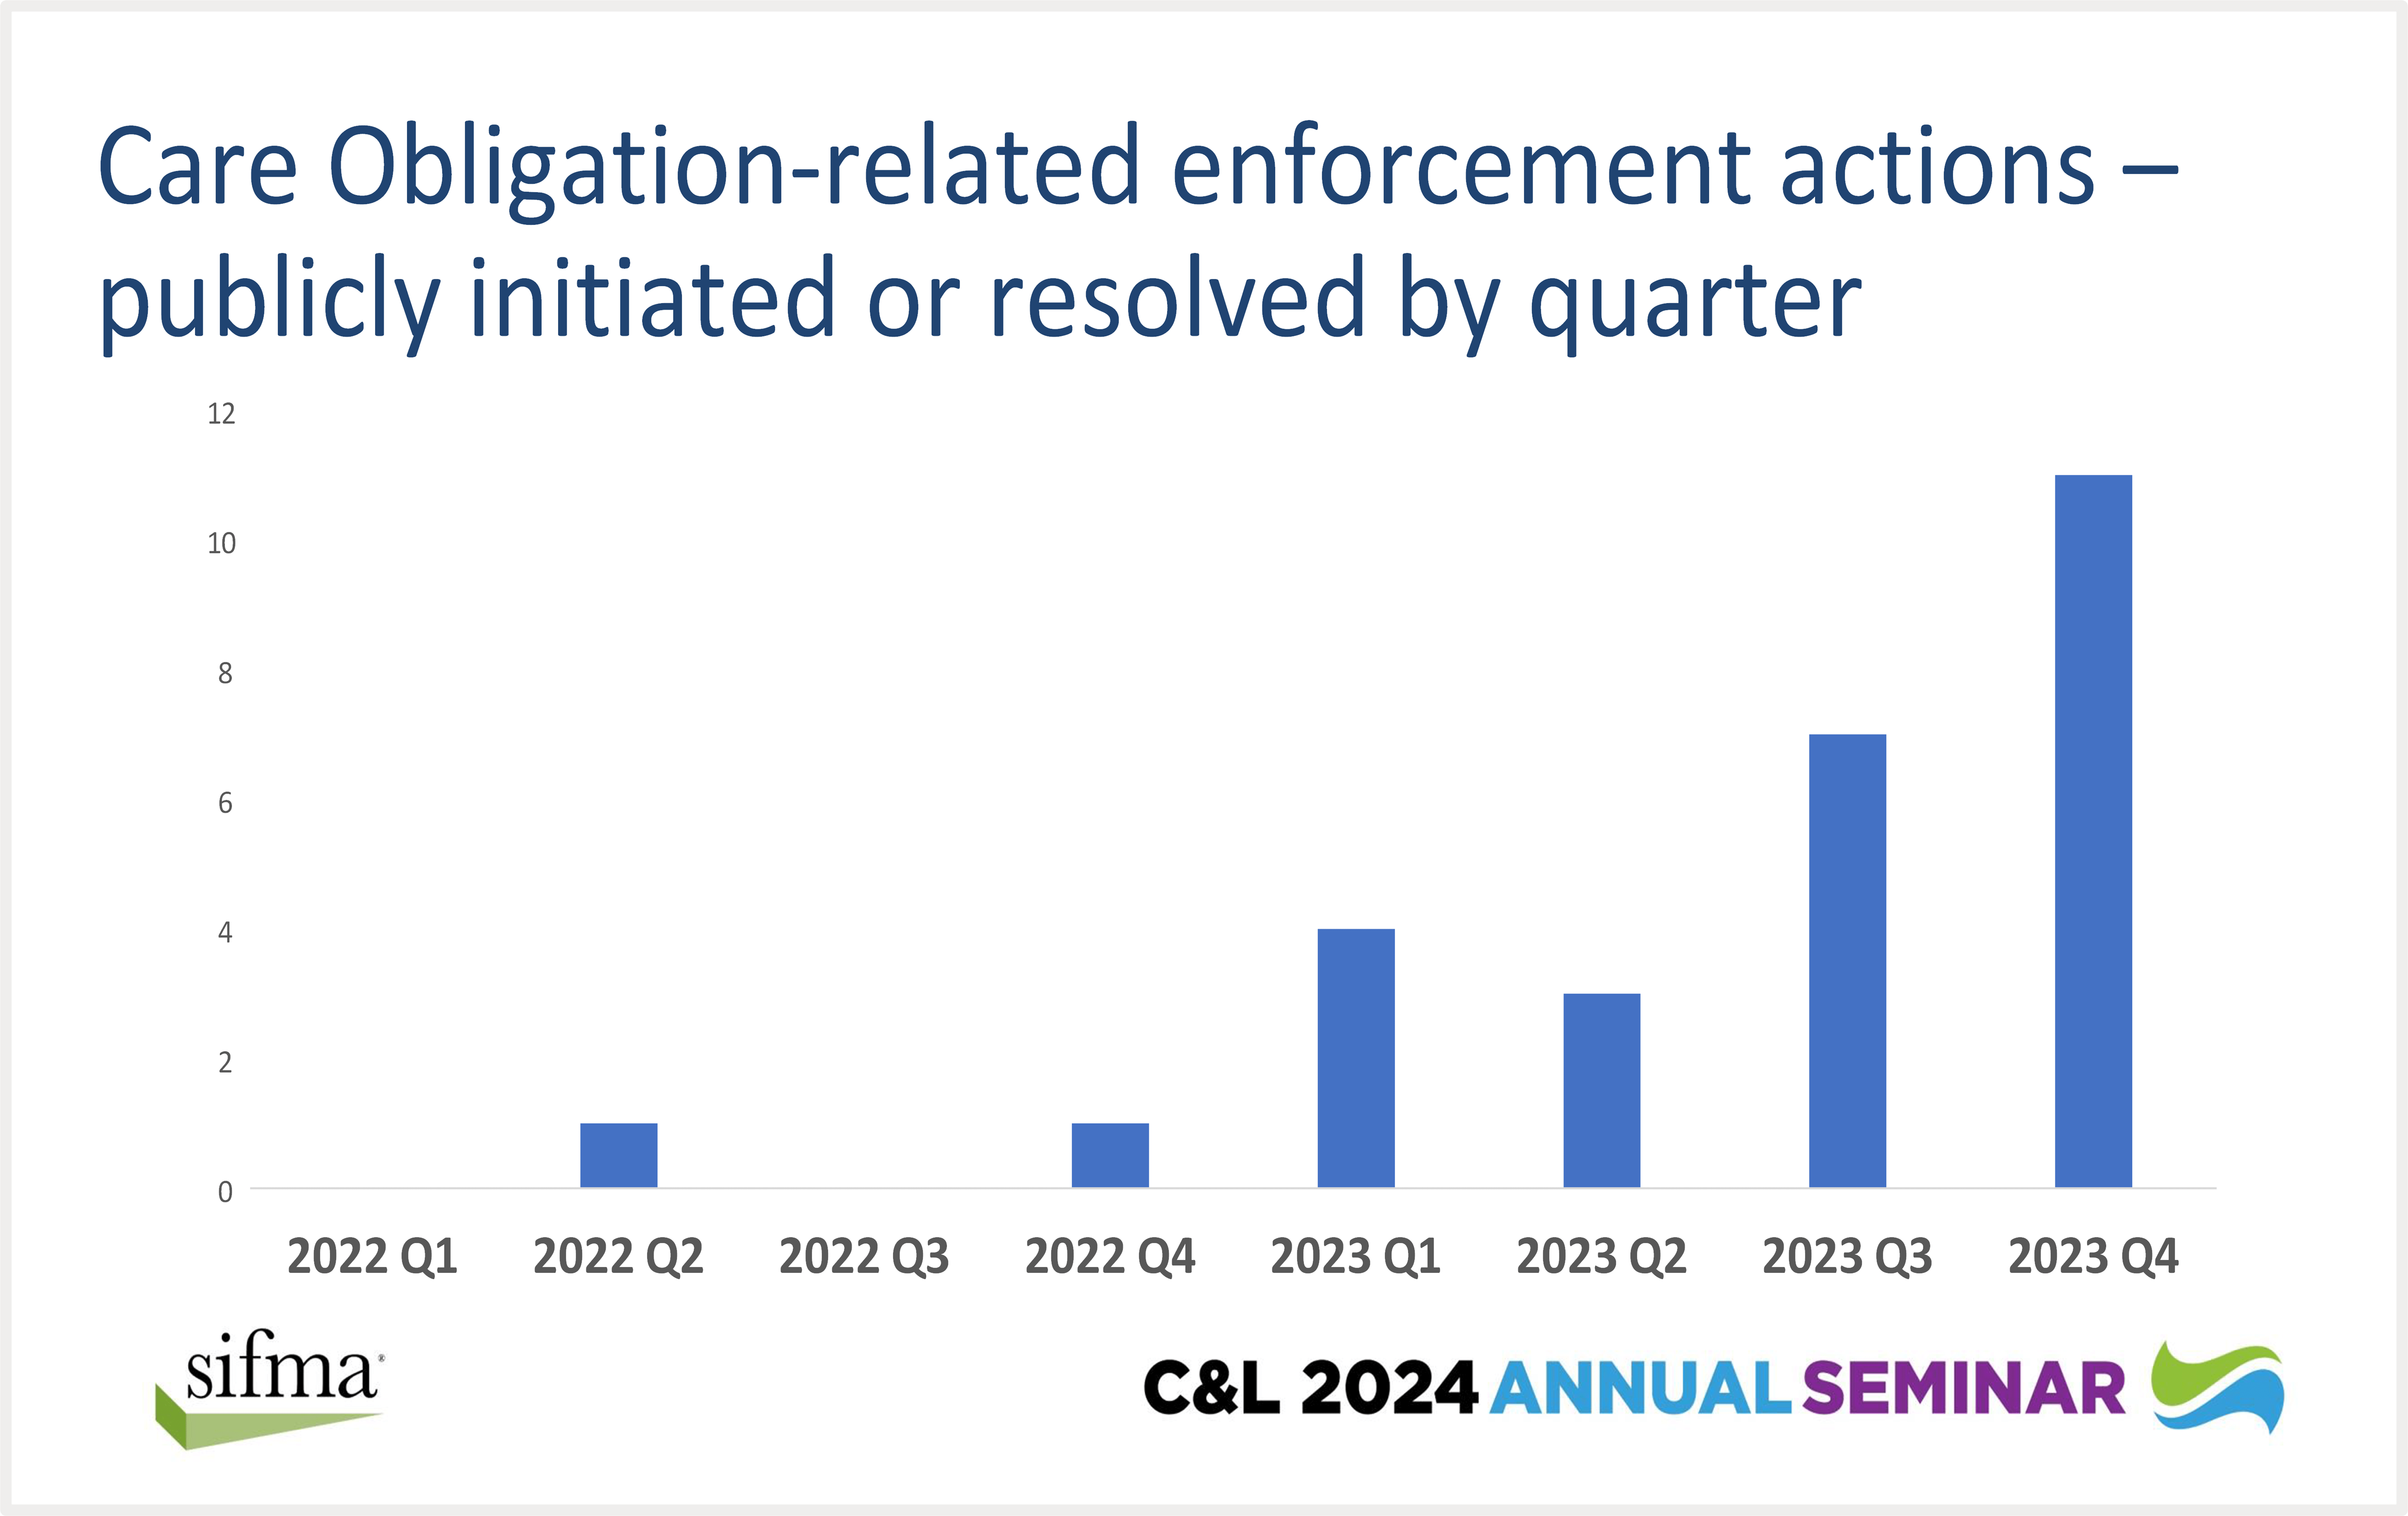 bar-chart-from-sifma-showing-care-obligation-related-enforcement-actions-publicly-initiated-or-resolved-by-quarter